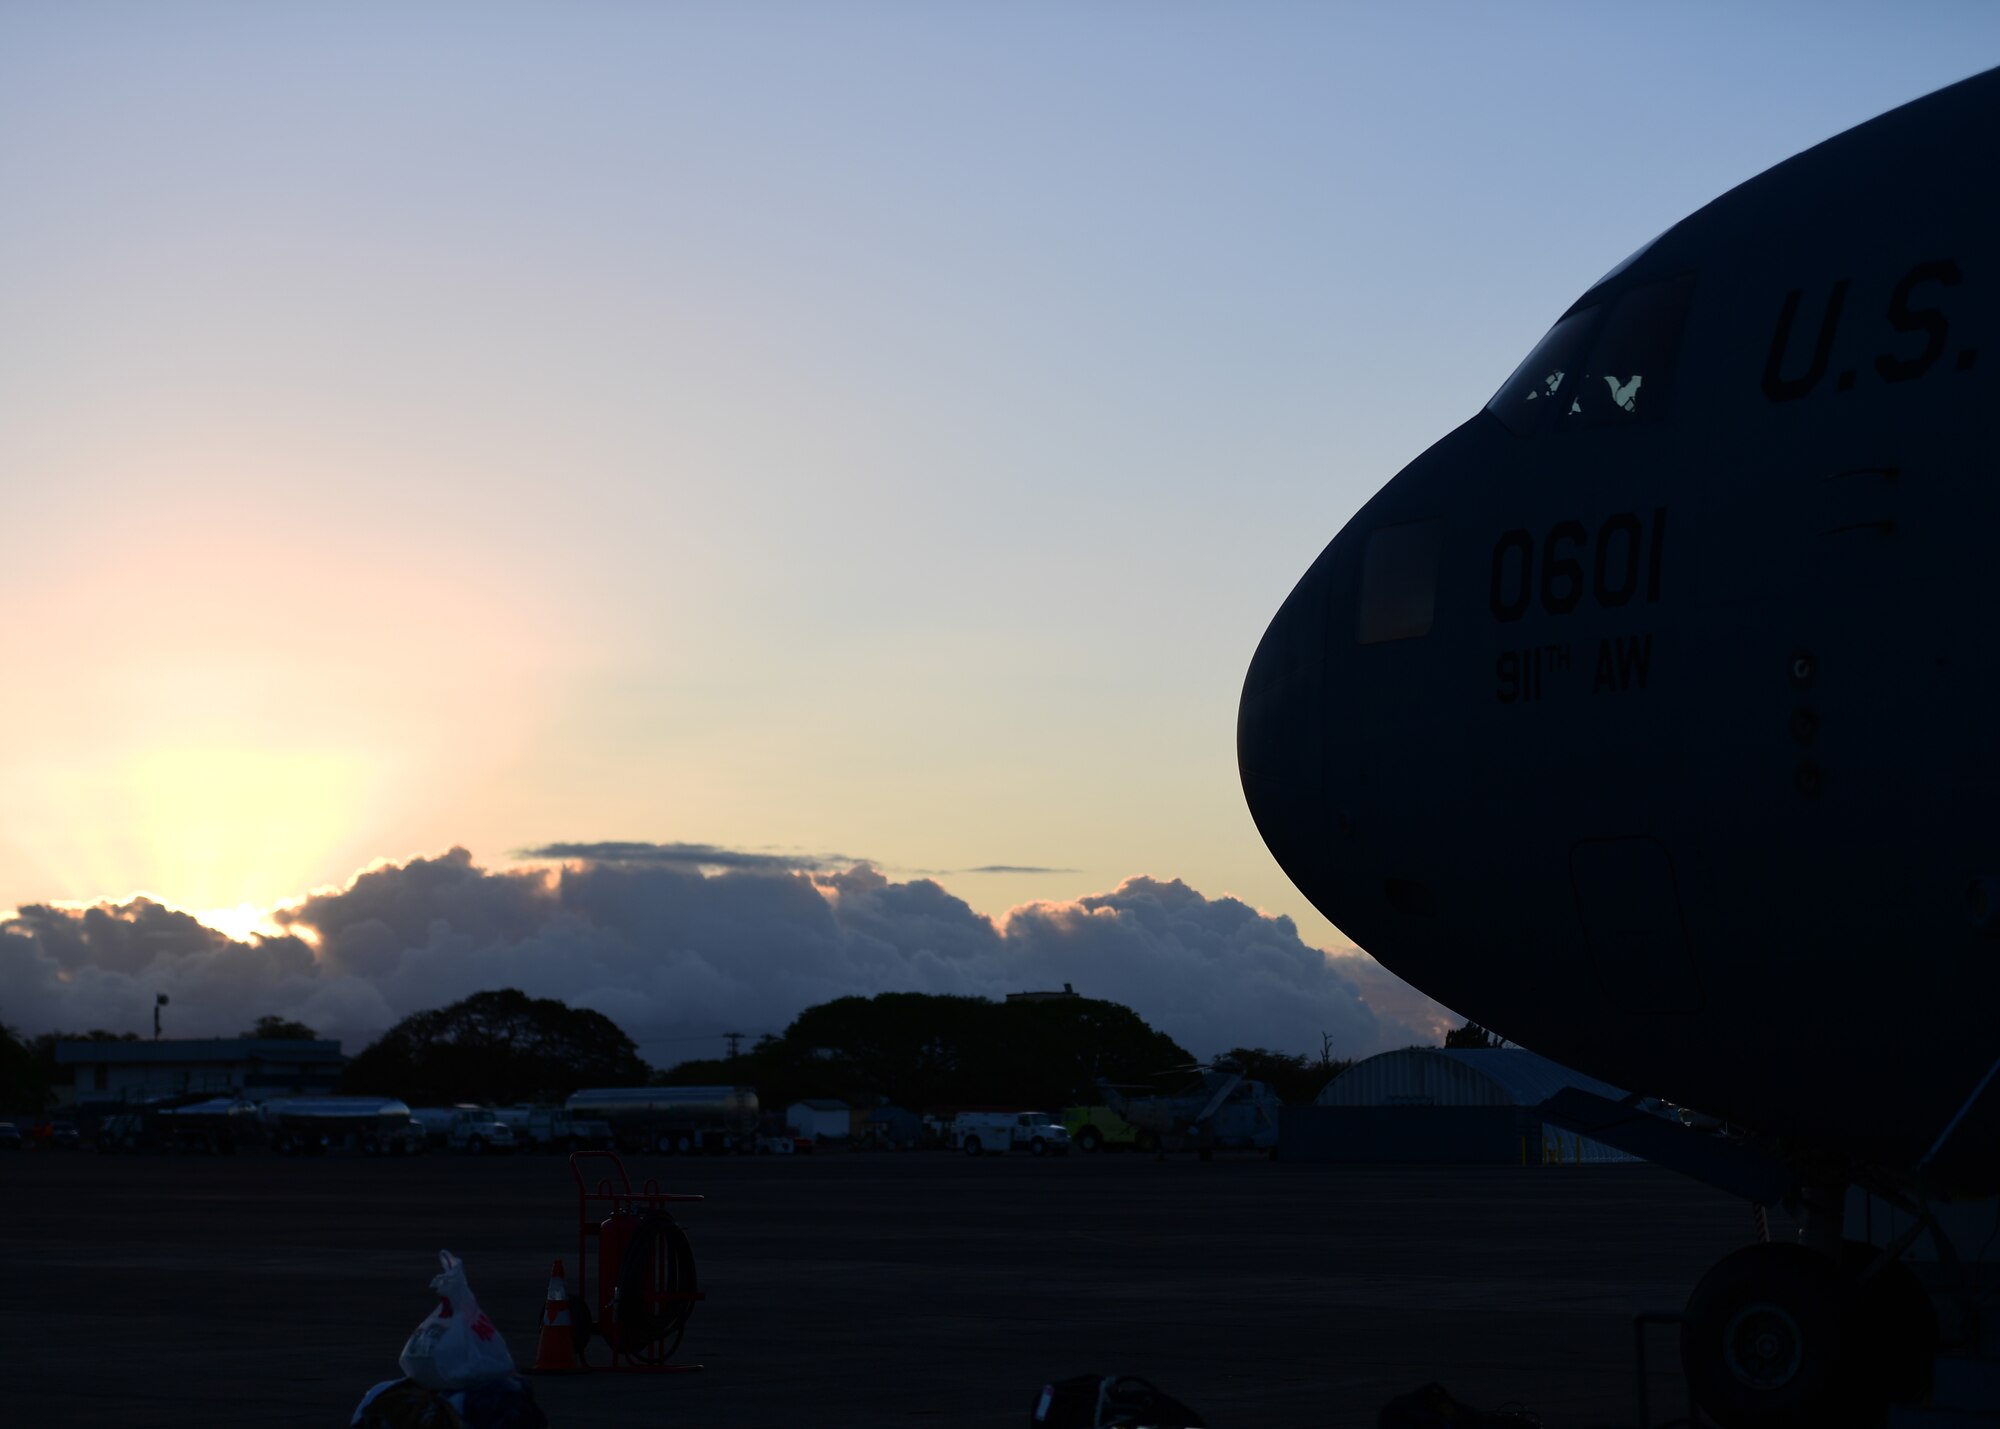 The 911th Airlift Wing C-17 Globemaster III sits ready for takeoff at Barbers Point Airfield, Hawaii April 26, 2019. The aircraft took the 911th Aeromedical Evacuation Squadron to Hawaii to participate in training with the 914th AES as well as with the 18th Aeromedical Evacuation Detachment 1 based out of Joint Base Pearl Harbor- Hickam but attached to Kadena Air Base, Japan. (U.S. Air Force Photo by Senior Airman Grace Thomson)